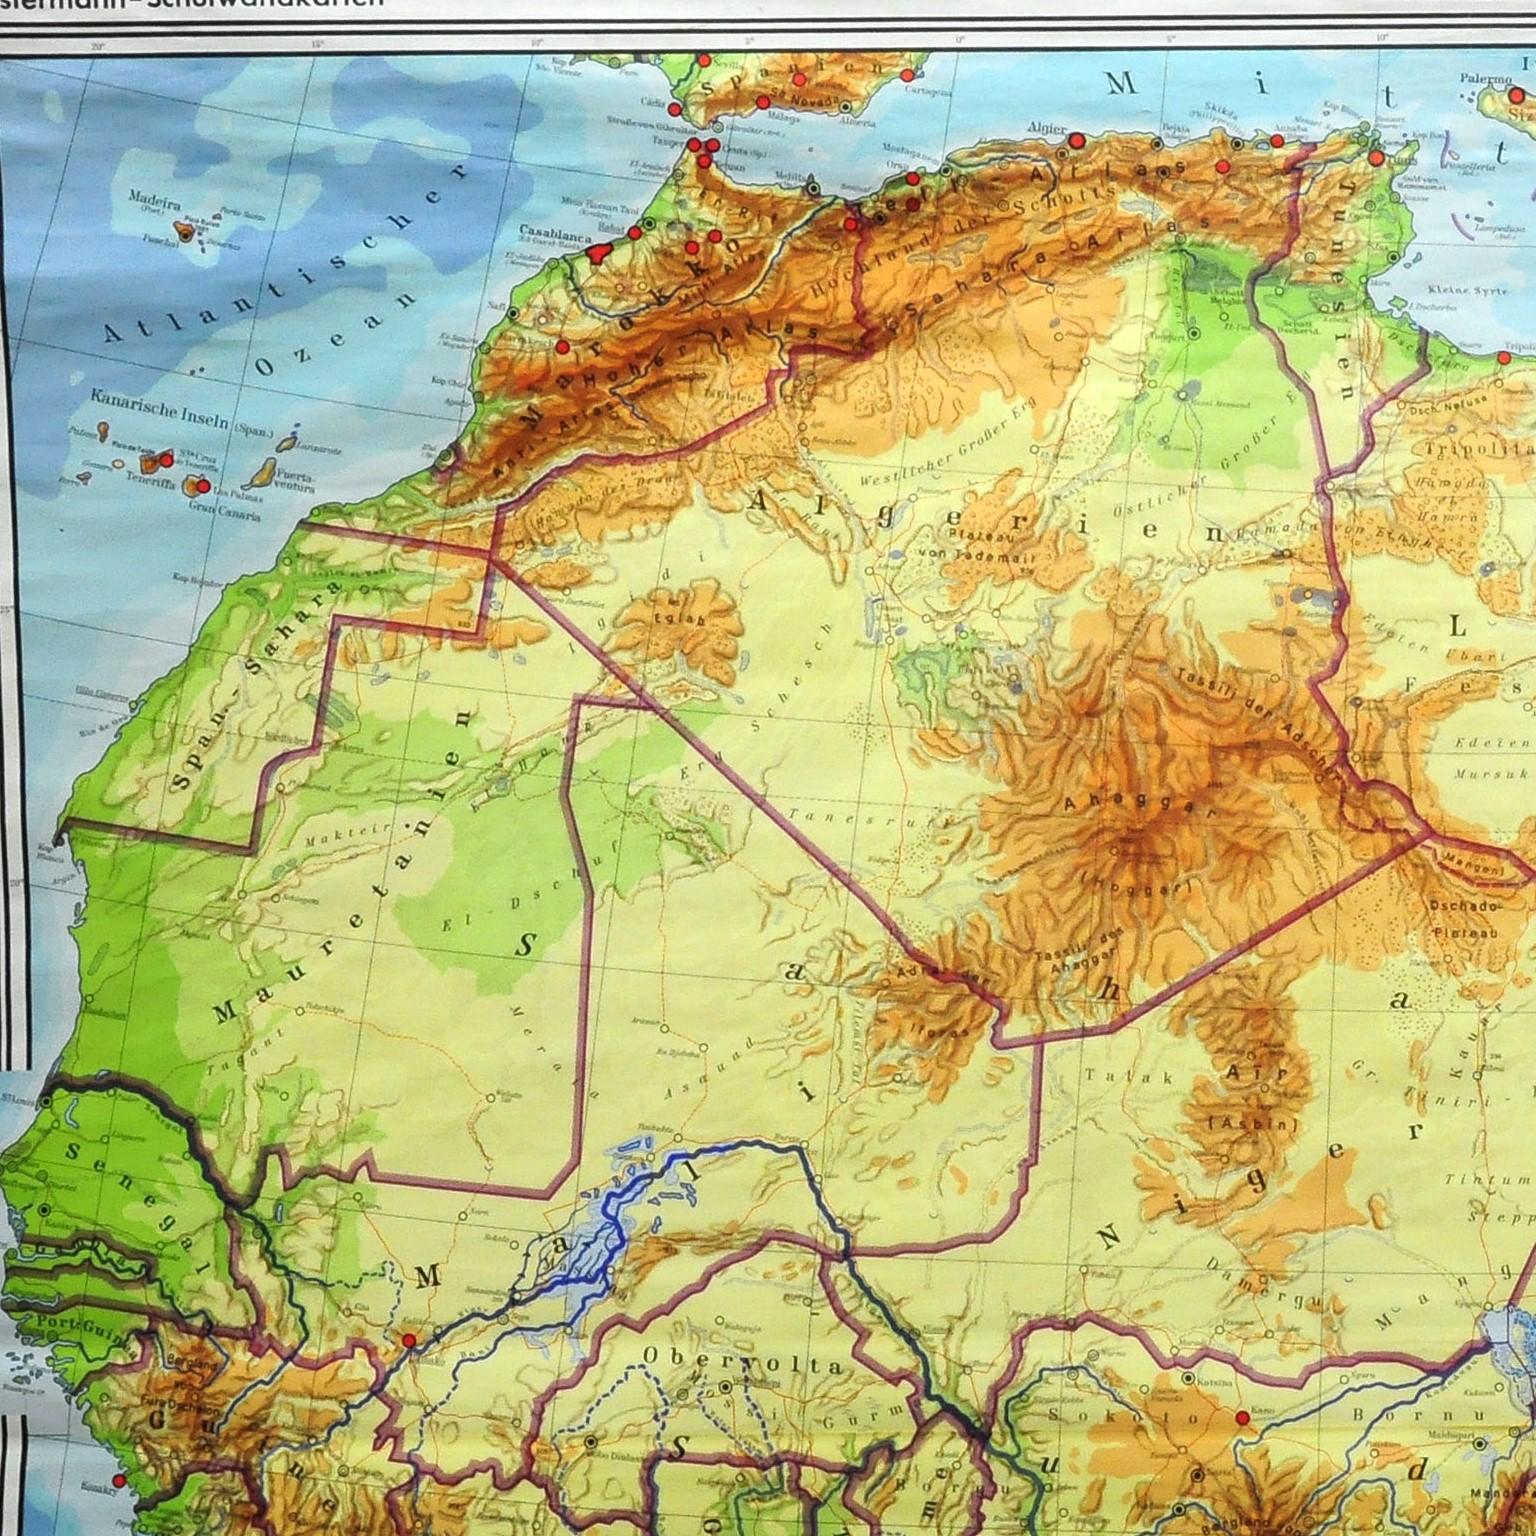 The wall map shows North Africa. It was published by Westermann-Schulwandkarten. Used as teaching material in German schools. Colorful print on paper reinforced with canvas,
Measurements:
Width 254 cm (100.00 inch)
Height 156 cm (61.42 inch)

The